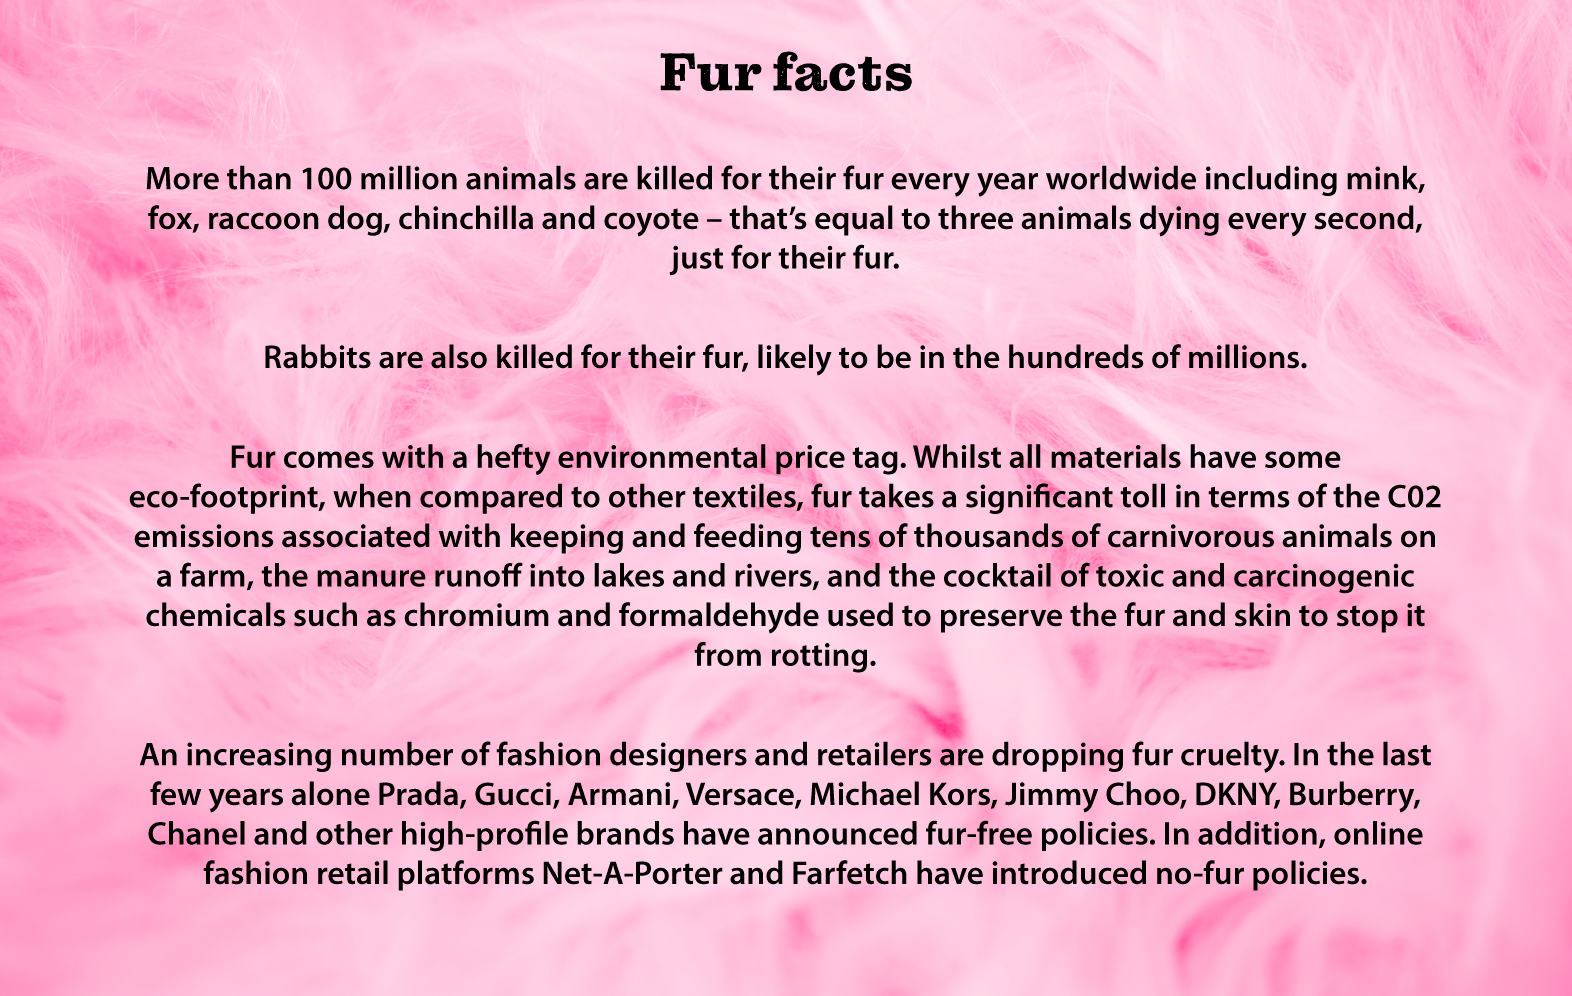 YouGov poll reveals vast majority (93%) of Brits don't wear real animal fur  - Animal Rights - Issues Online